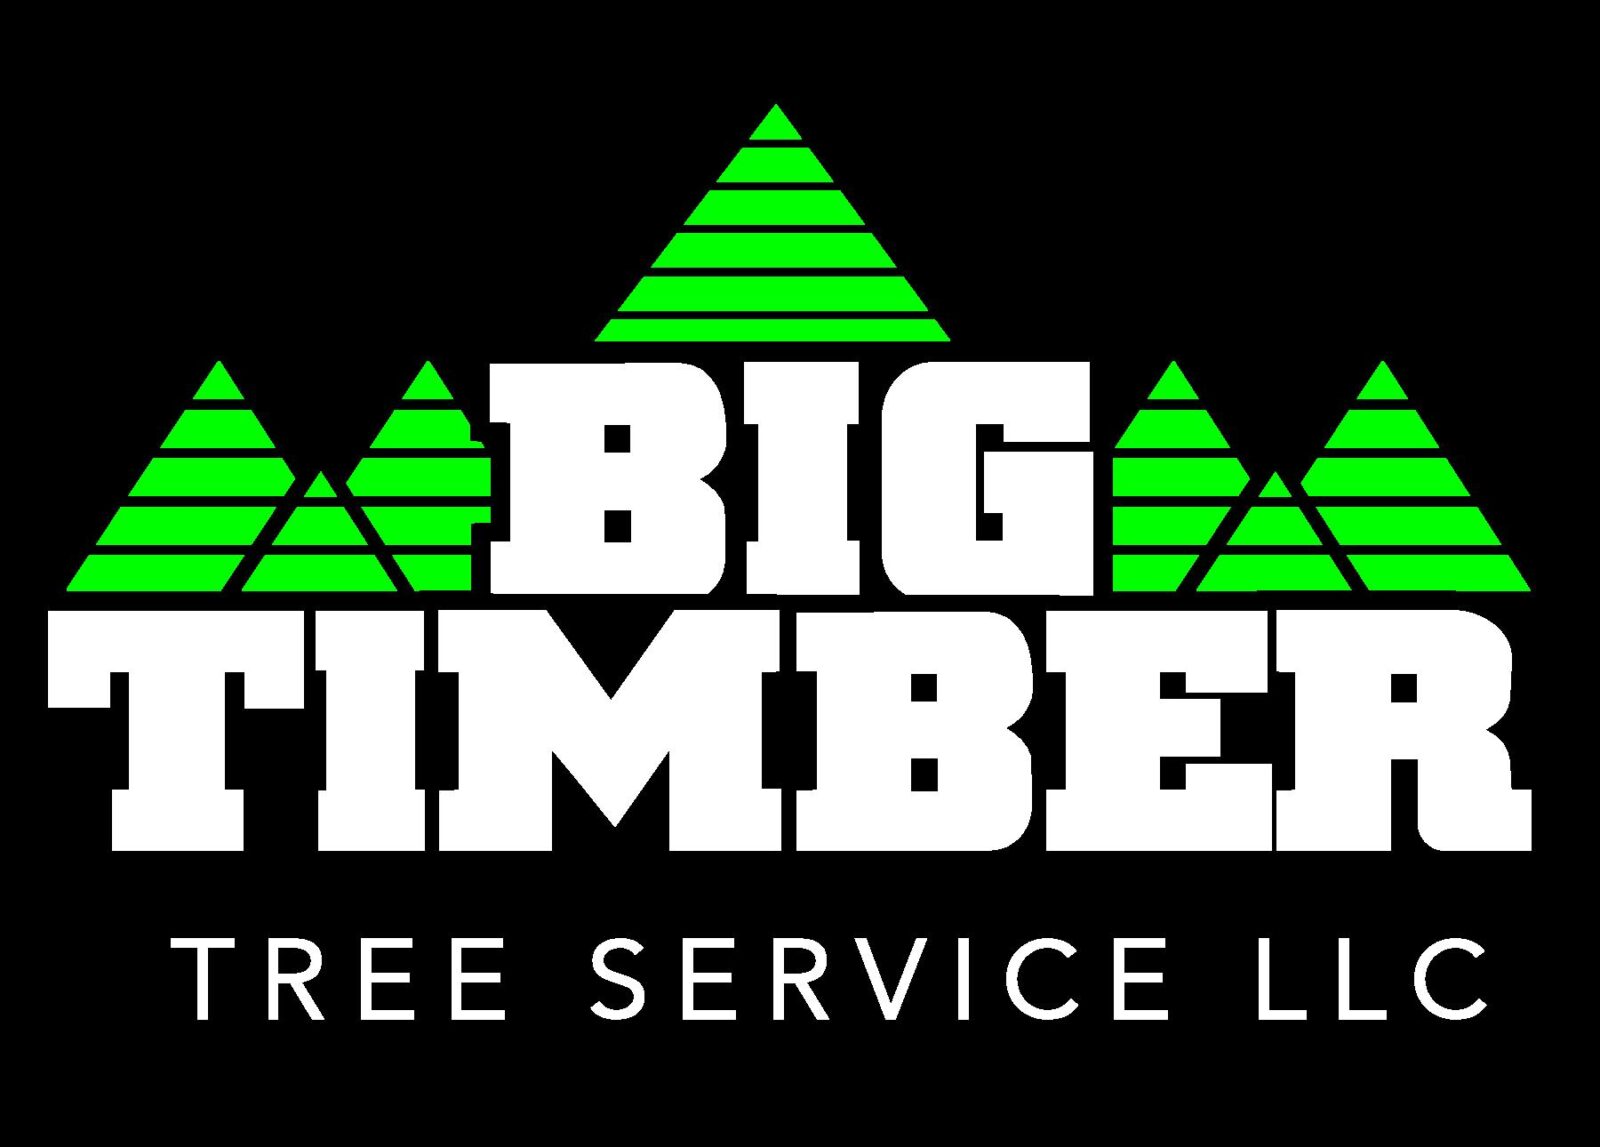 Bamboo Removal Services - Big Timber Tree Service LLC